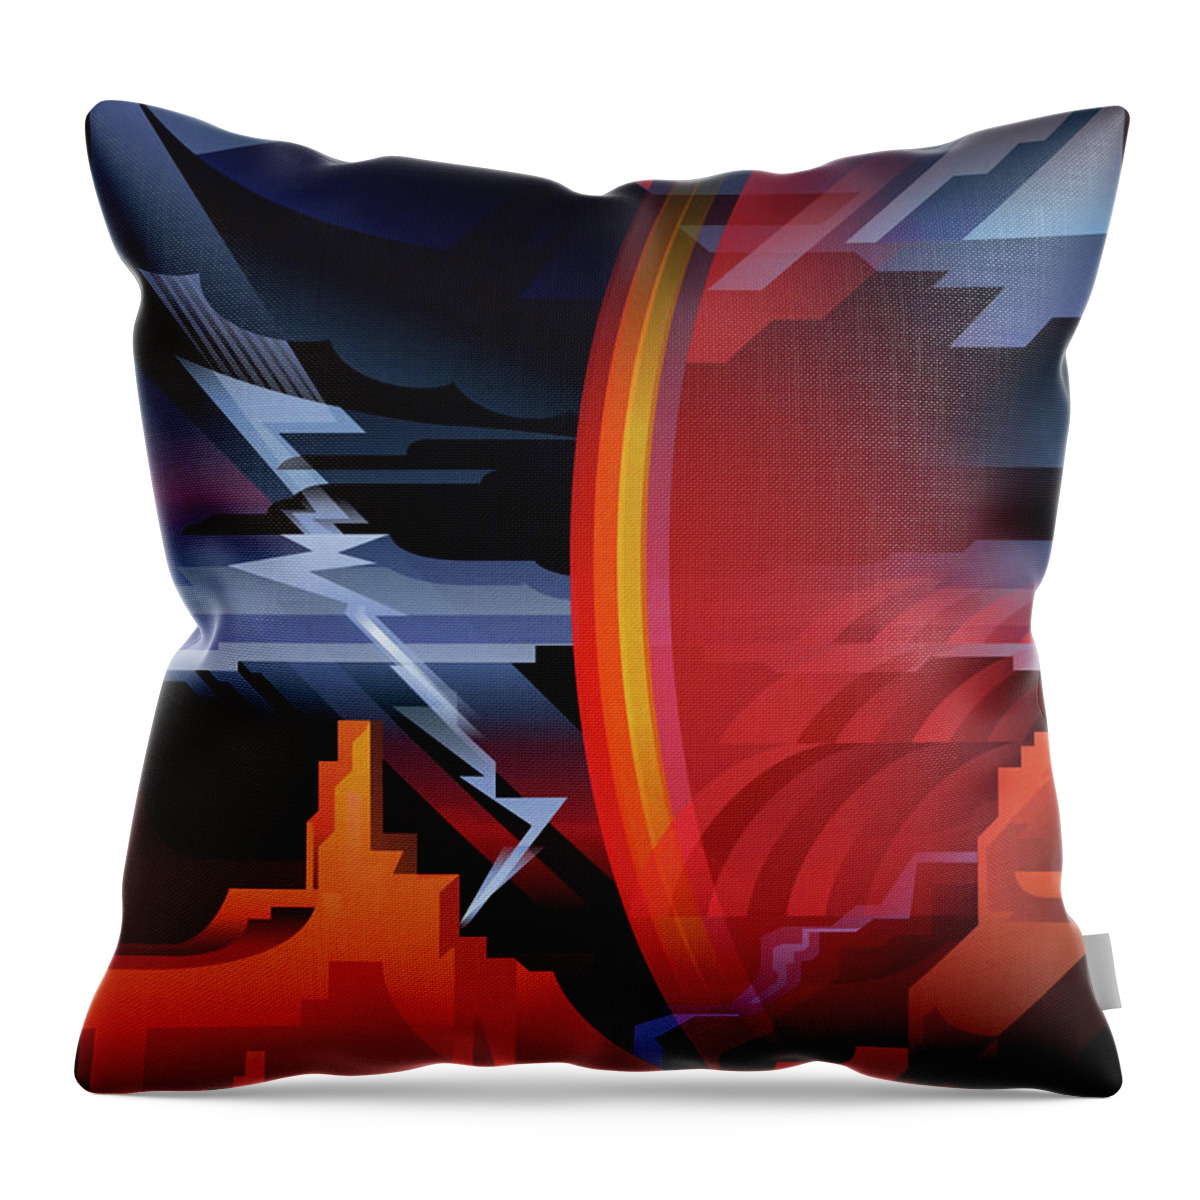 Grand Canyon Throw Pillow featuring the digital art GRAND CANYON Storm of Pima Point by Garth Glazier